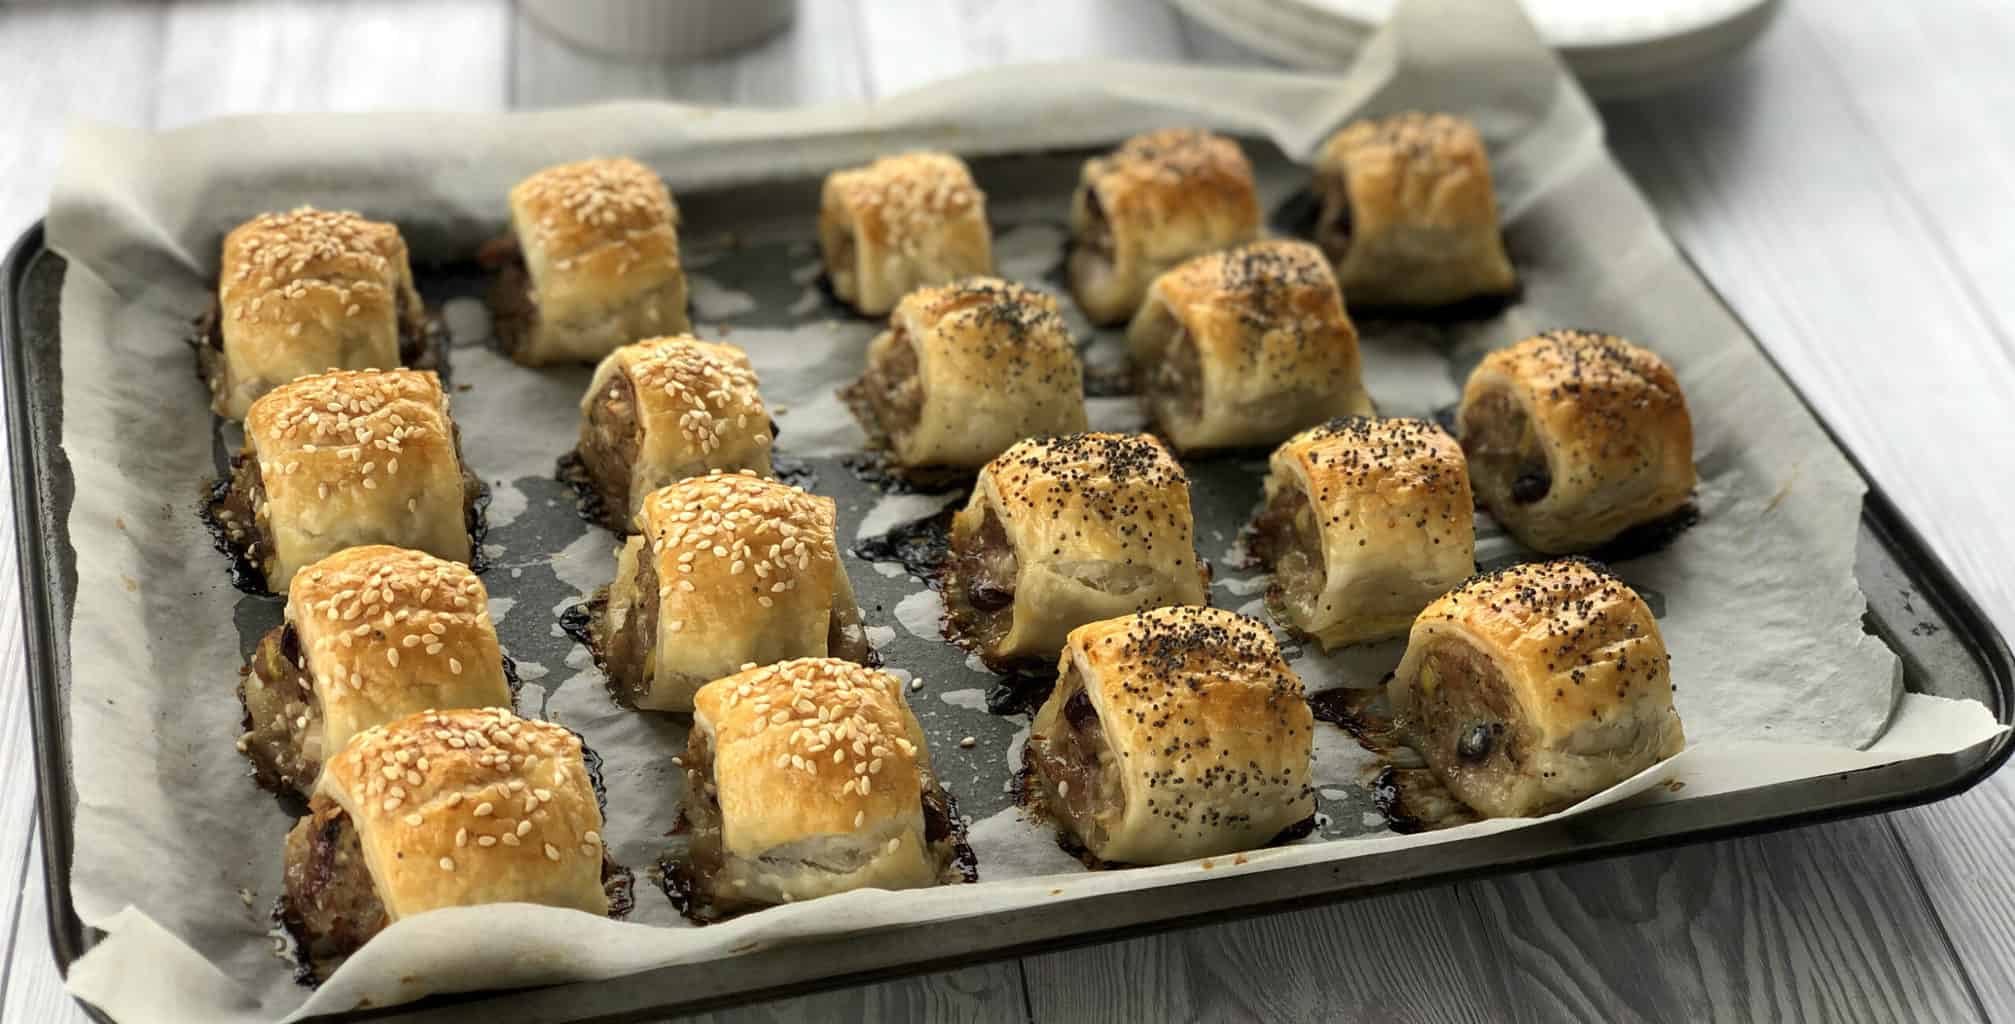 Ovenbaked sausage rolls with pork, cranberry and apple